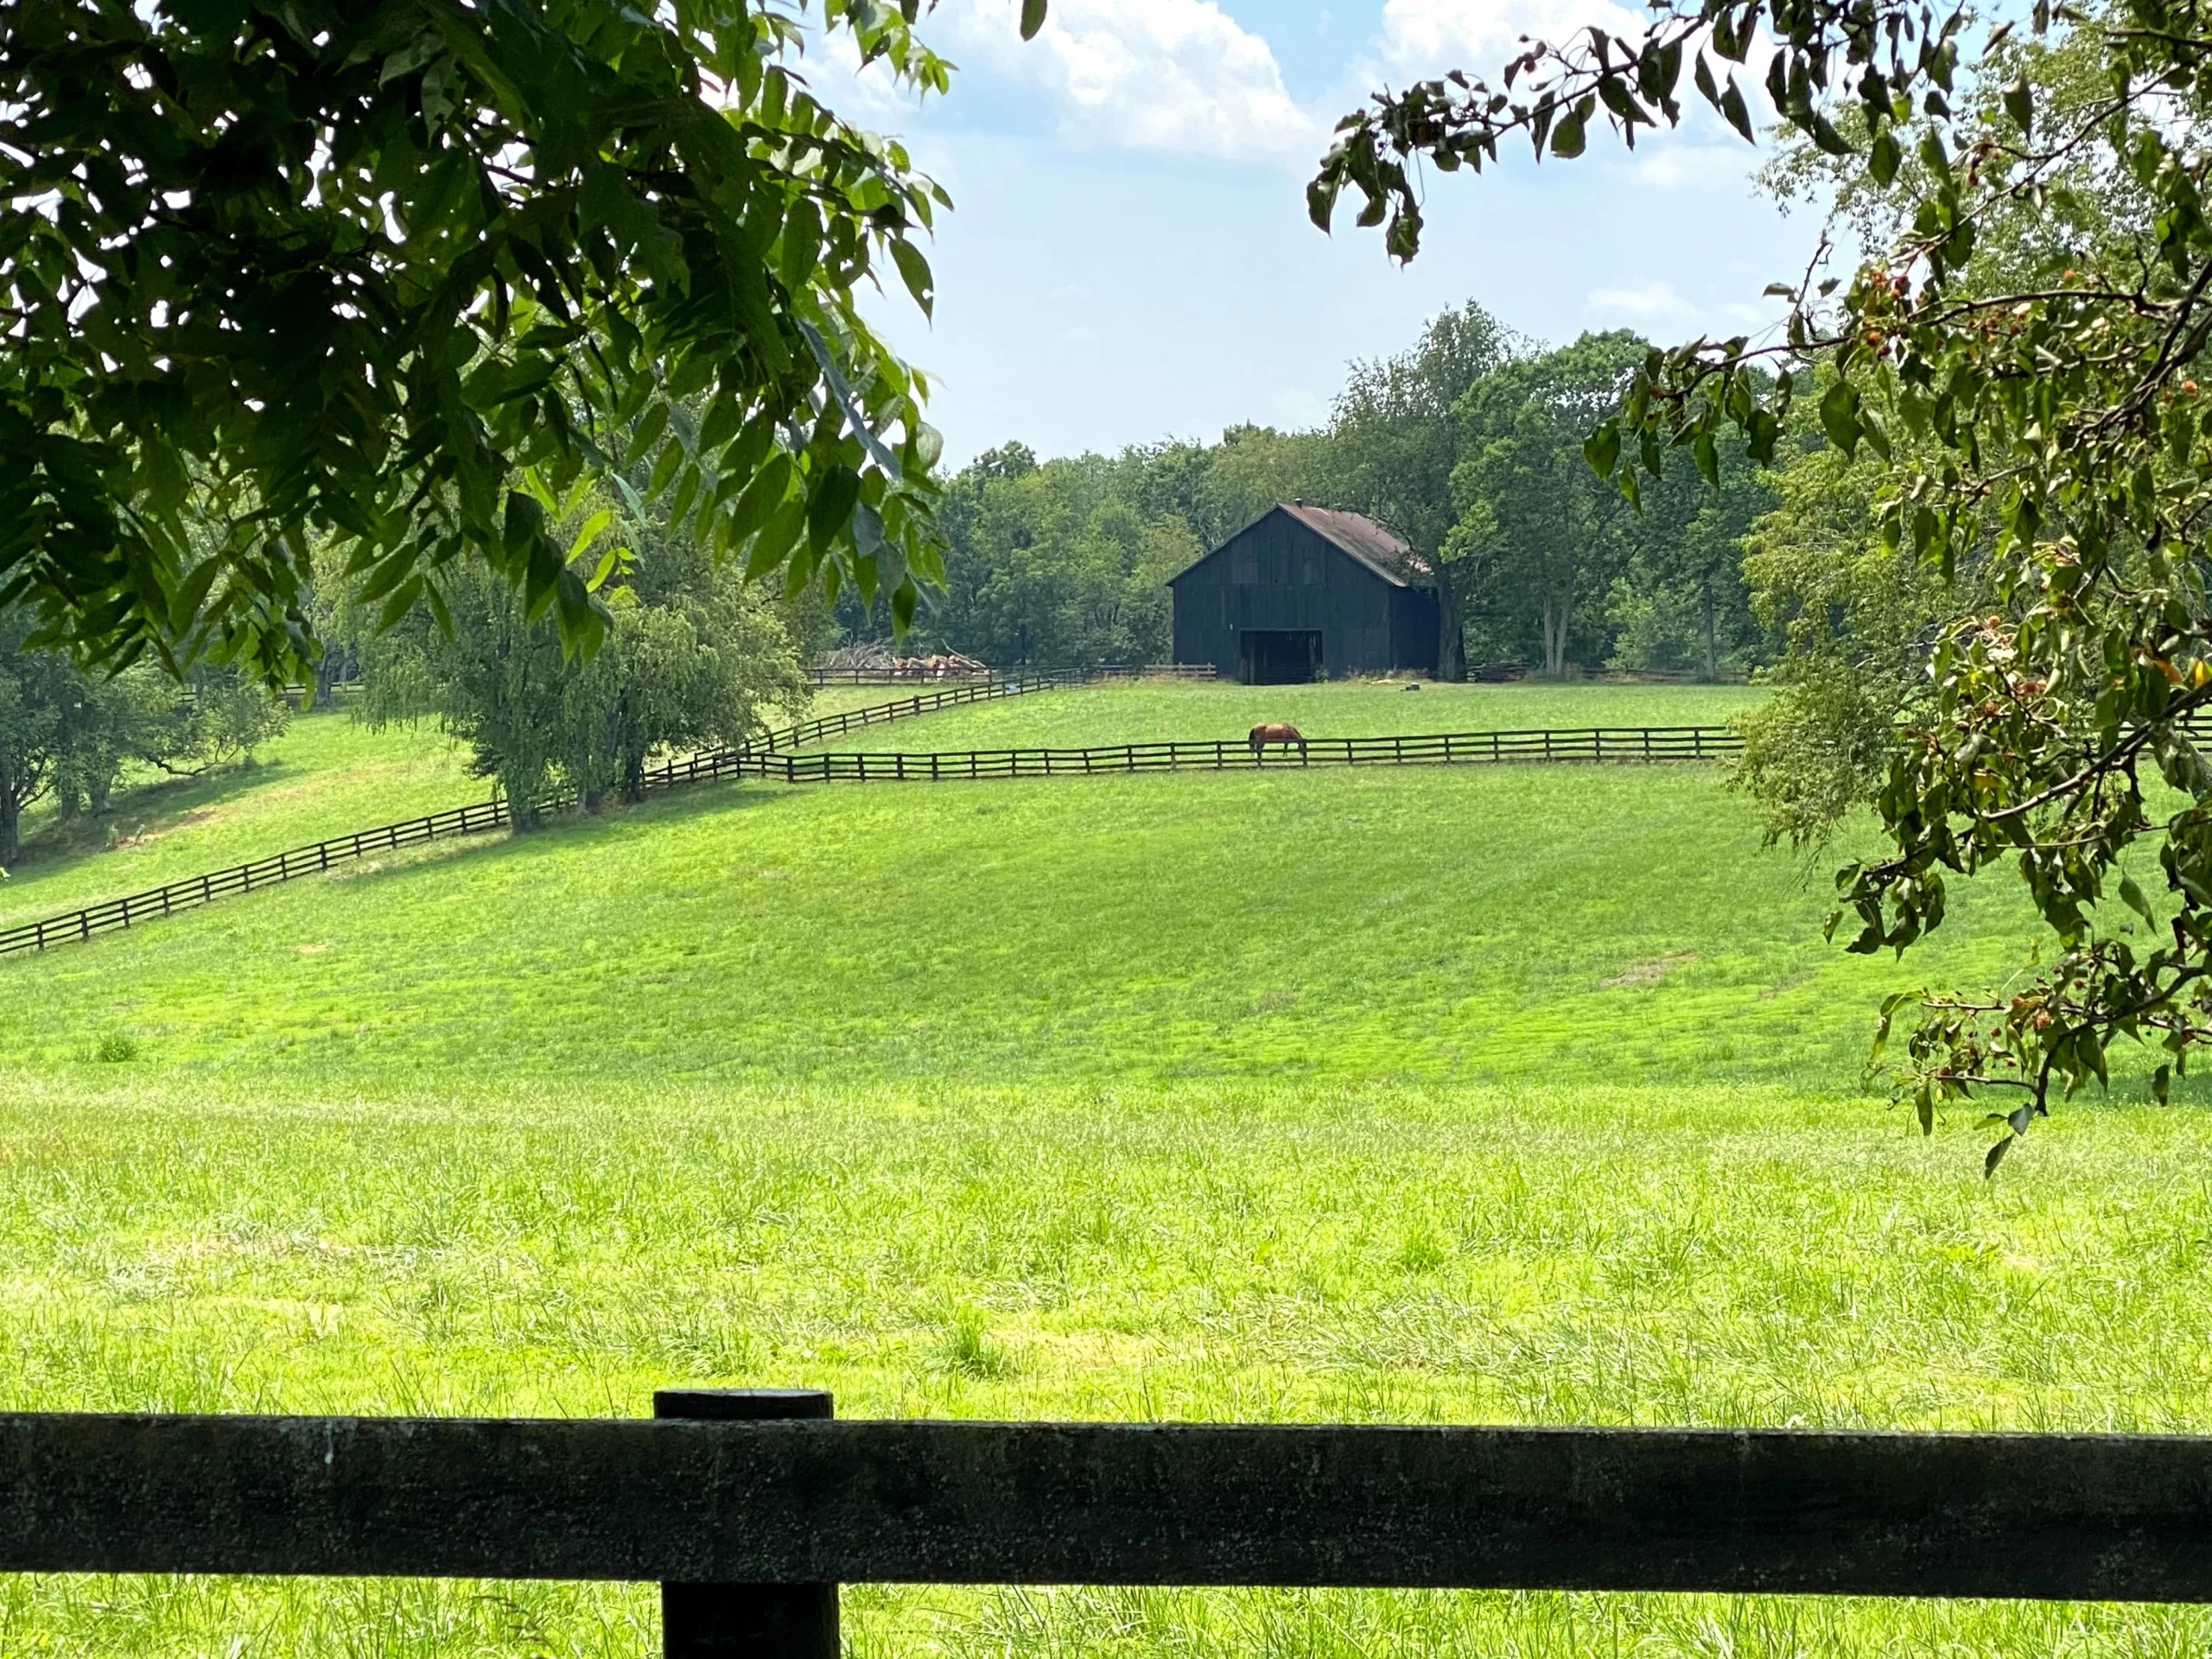 Published on August 1, 2020 Apple, iPhone 11 Pro Max Free to use under the Unsplash License Rustic Barn, Green Pastures and a Horse living its life.